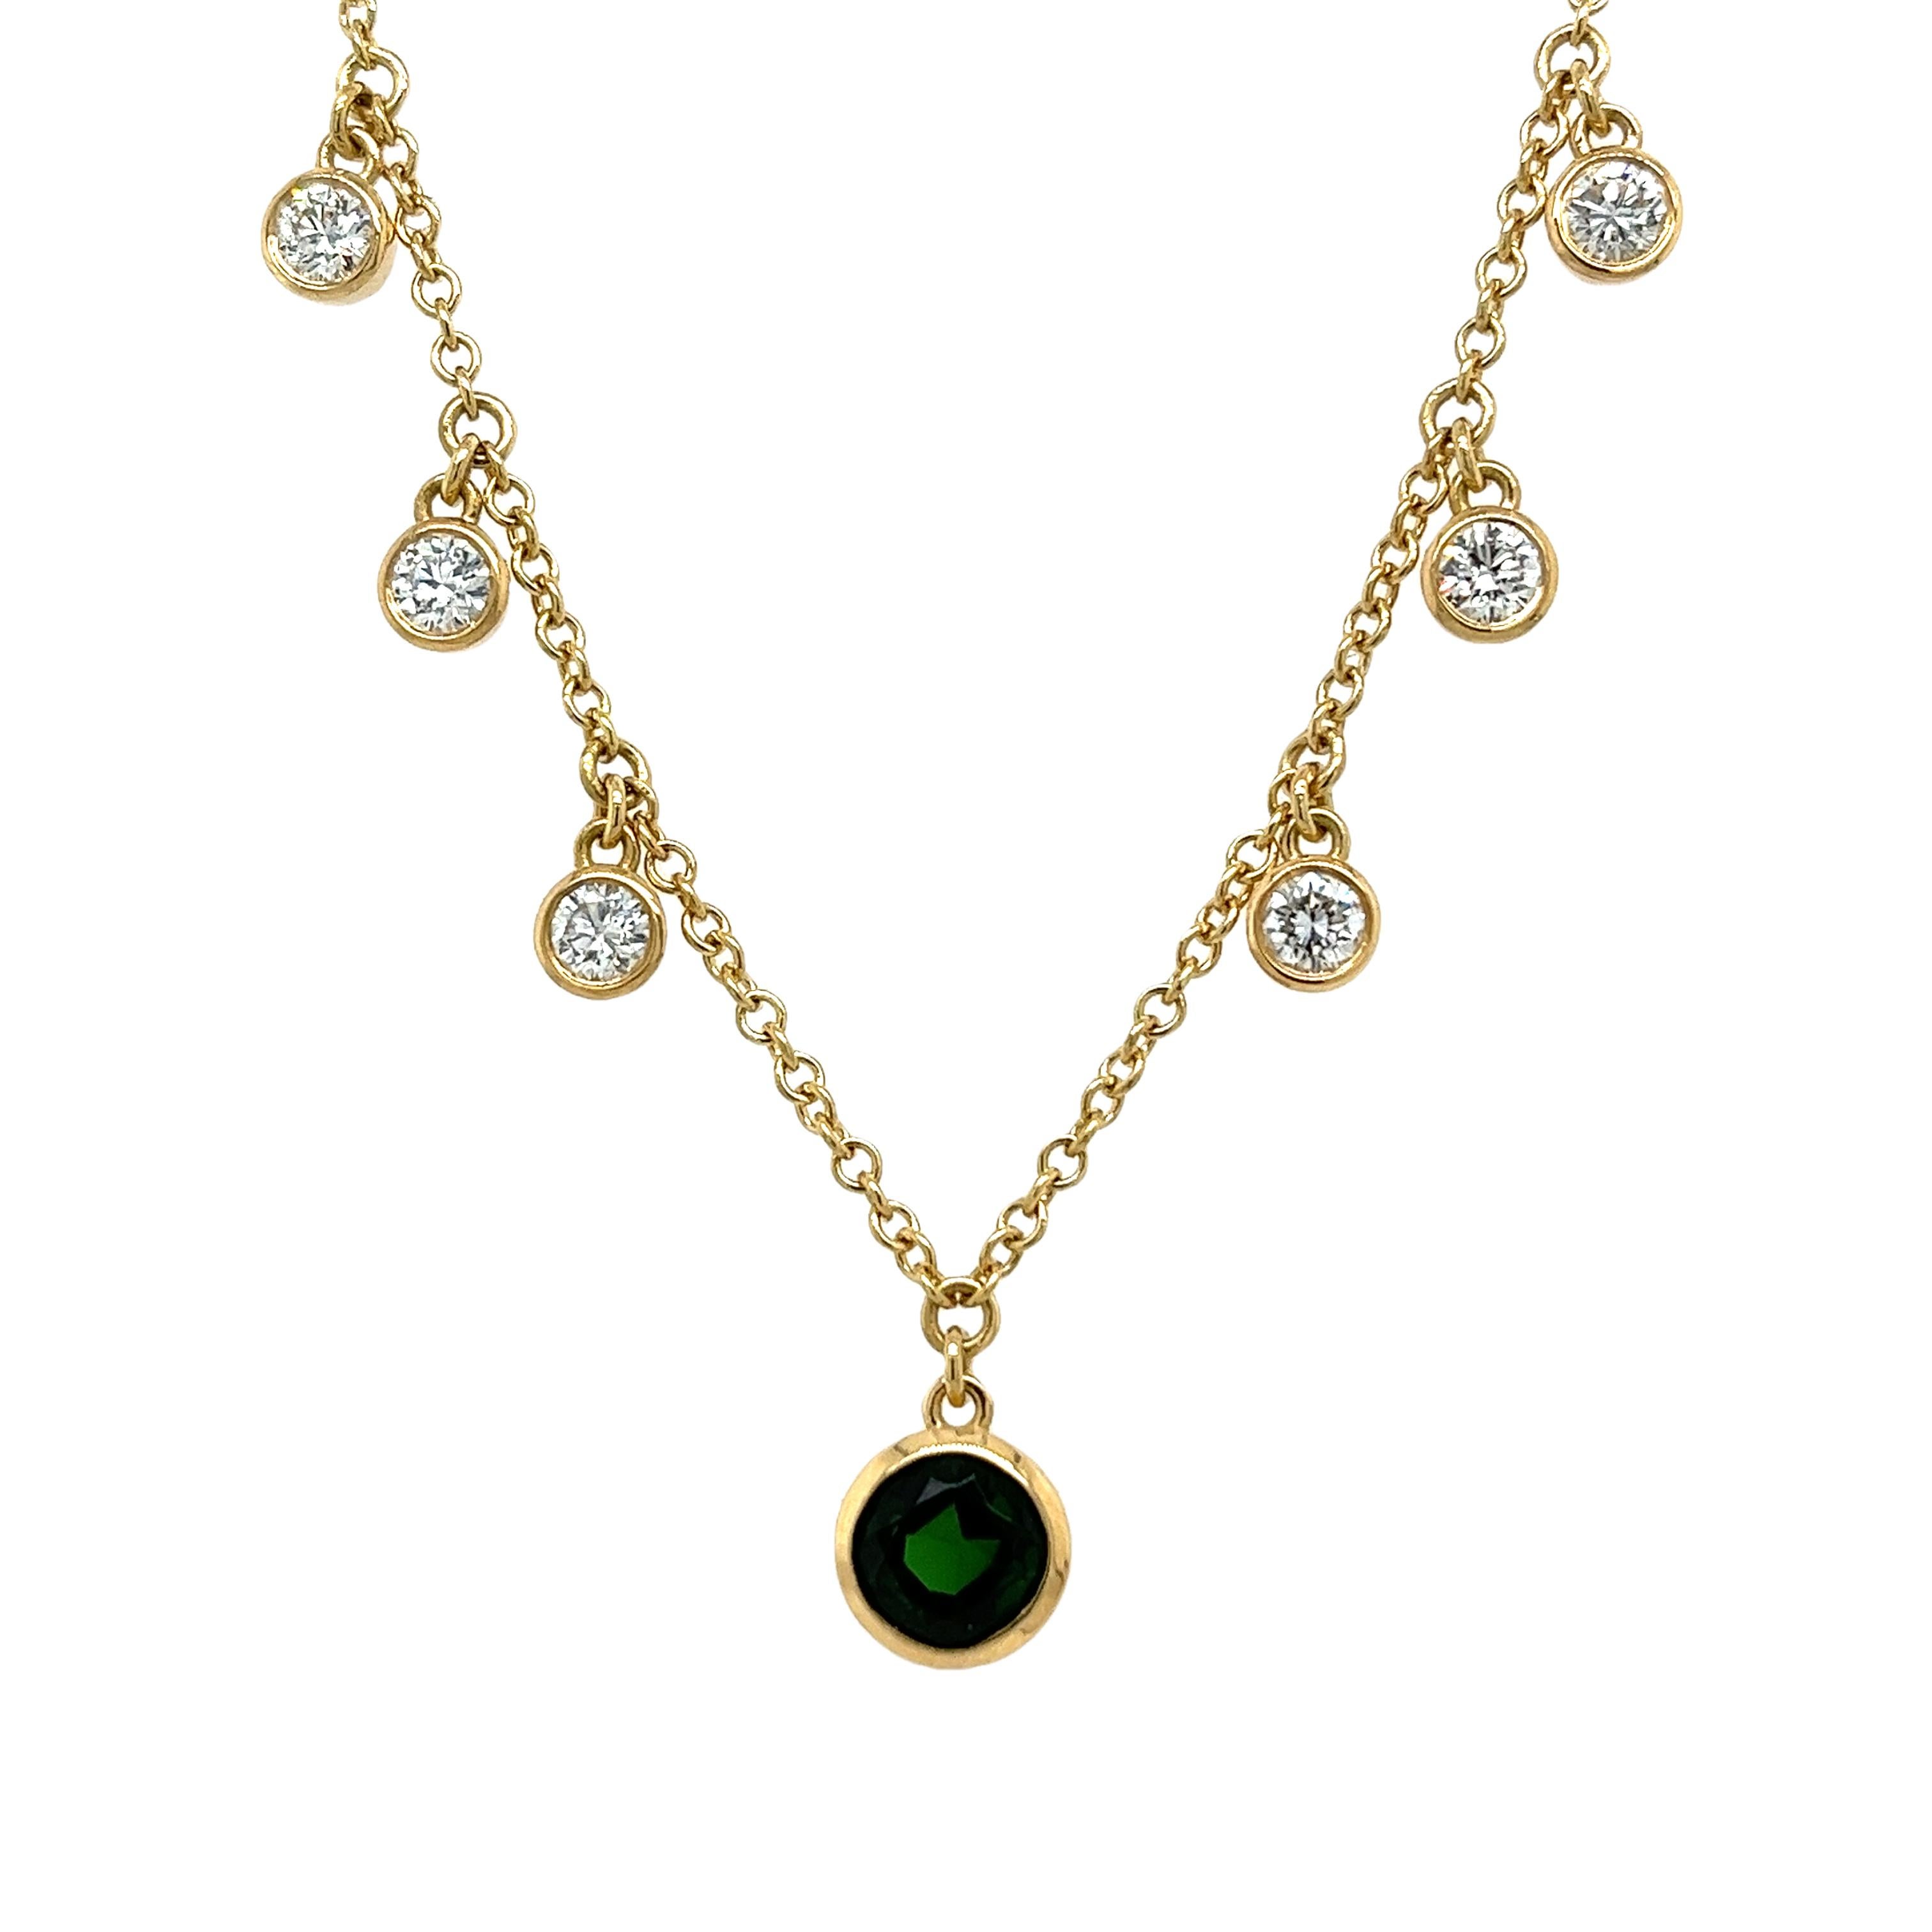 A true embodiment of elegance and sophistication.
This captivating piece showcases a stunning 1.07ct natural Tsavorite and Diamond necklace set with 6 dazzling round brilliant cut Diamonds, with a total Diamond weight of 0.85ct G/H VS1 in 18ct